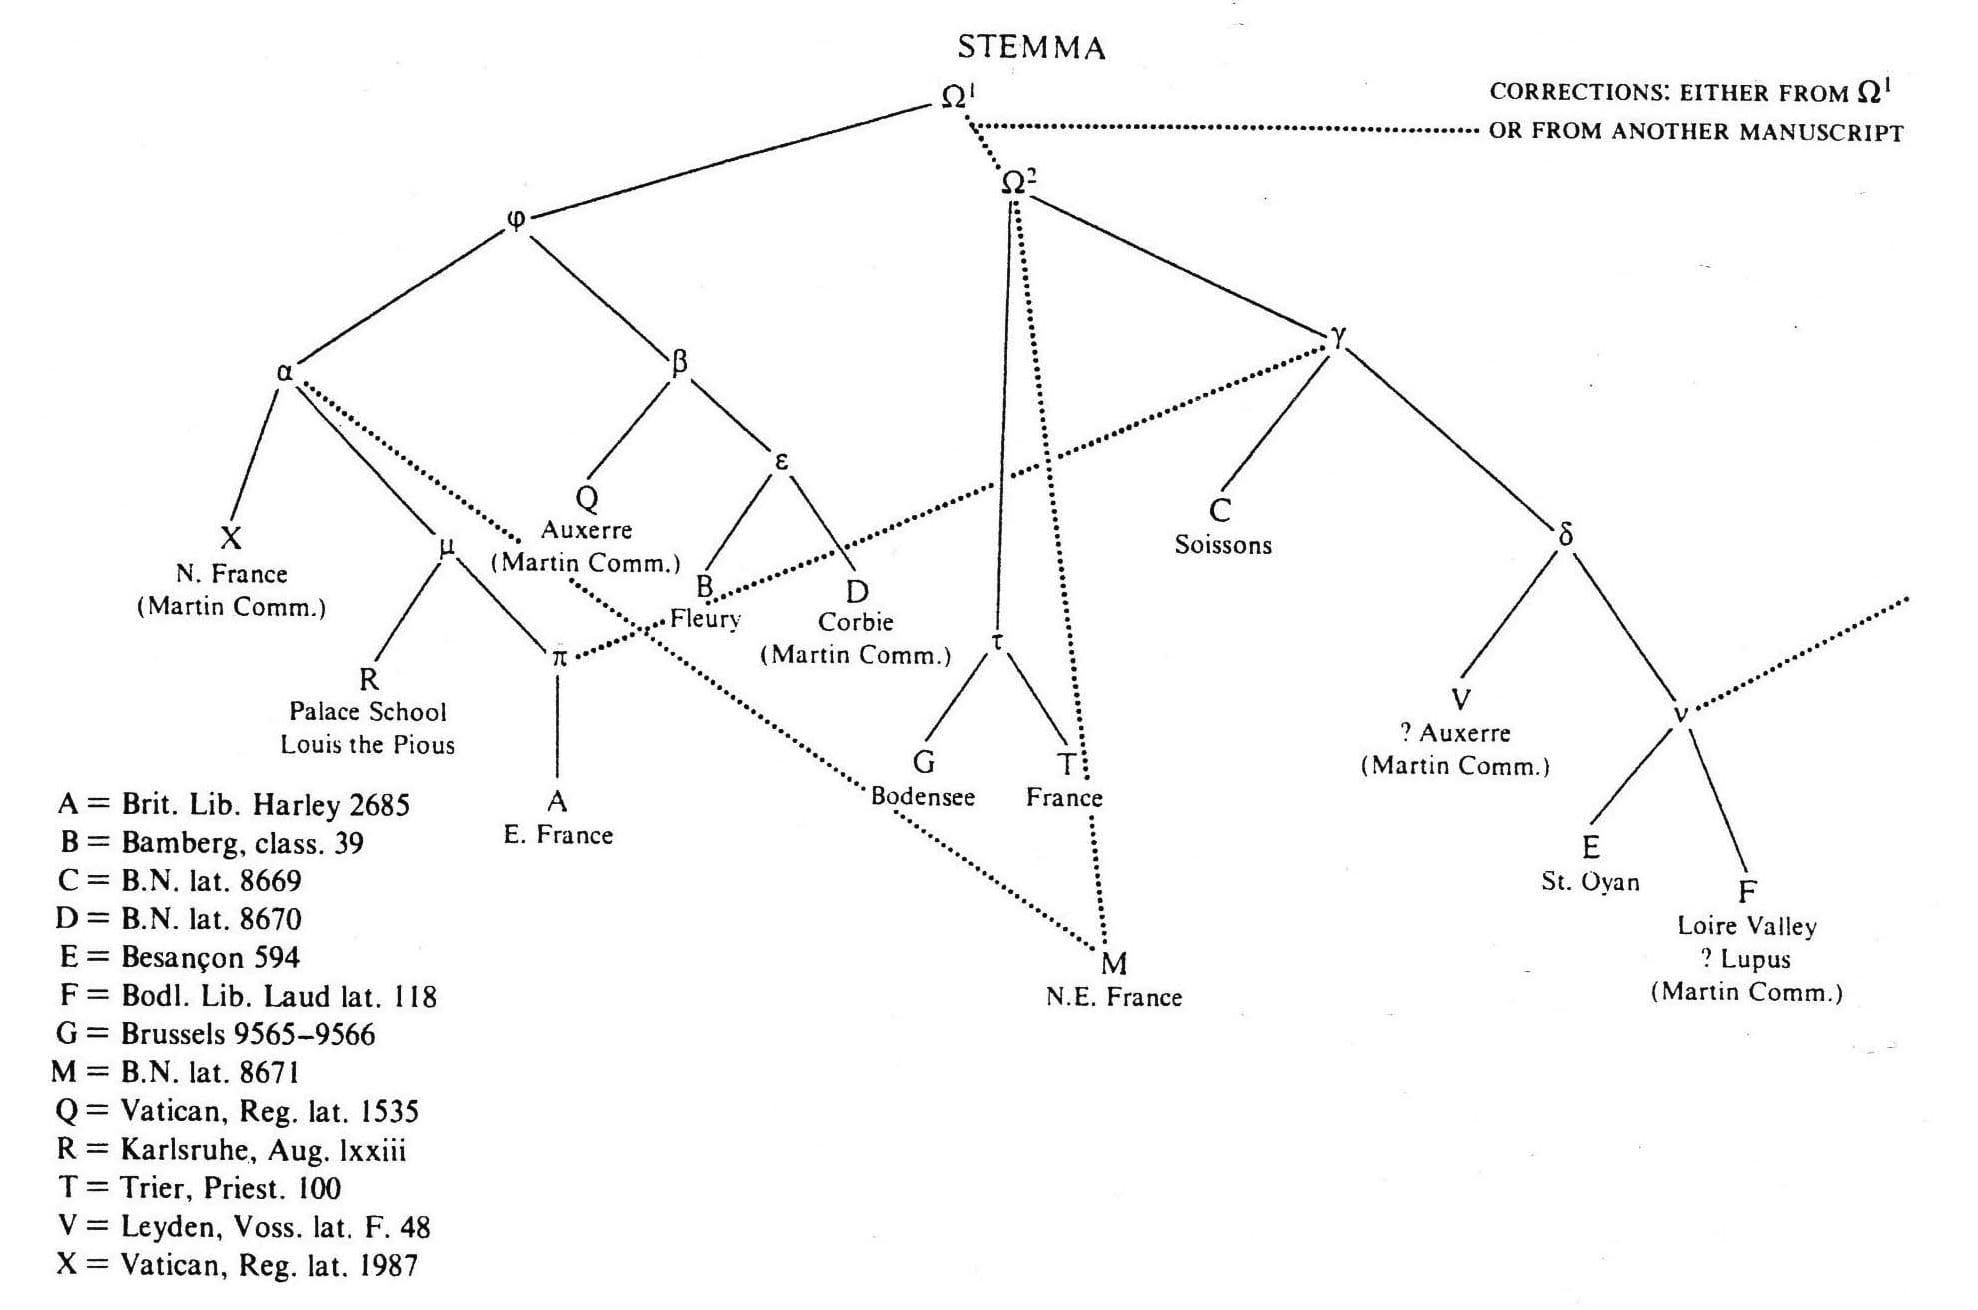 Example of a 'stemma' tracing text transmissions in the model proposed by Karl Lachmann (Stemma for De nuptiis Philologiae et Mercurii by Martianus Capella proposed by Danuta Shanzer. "Felix Capella: Minus sensus qum nominis pecudalis," Classical Philology 81,1 (1986), p. 62-81).